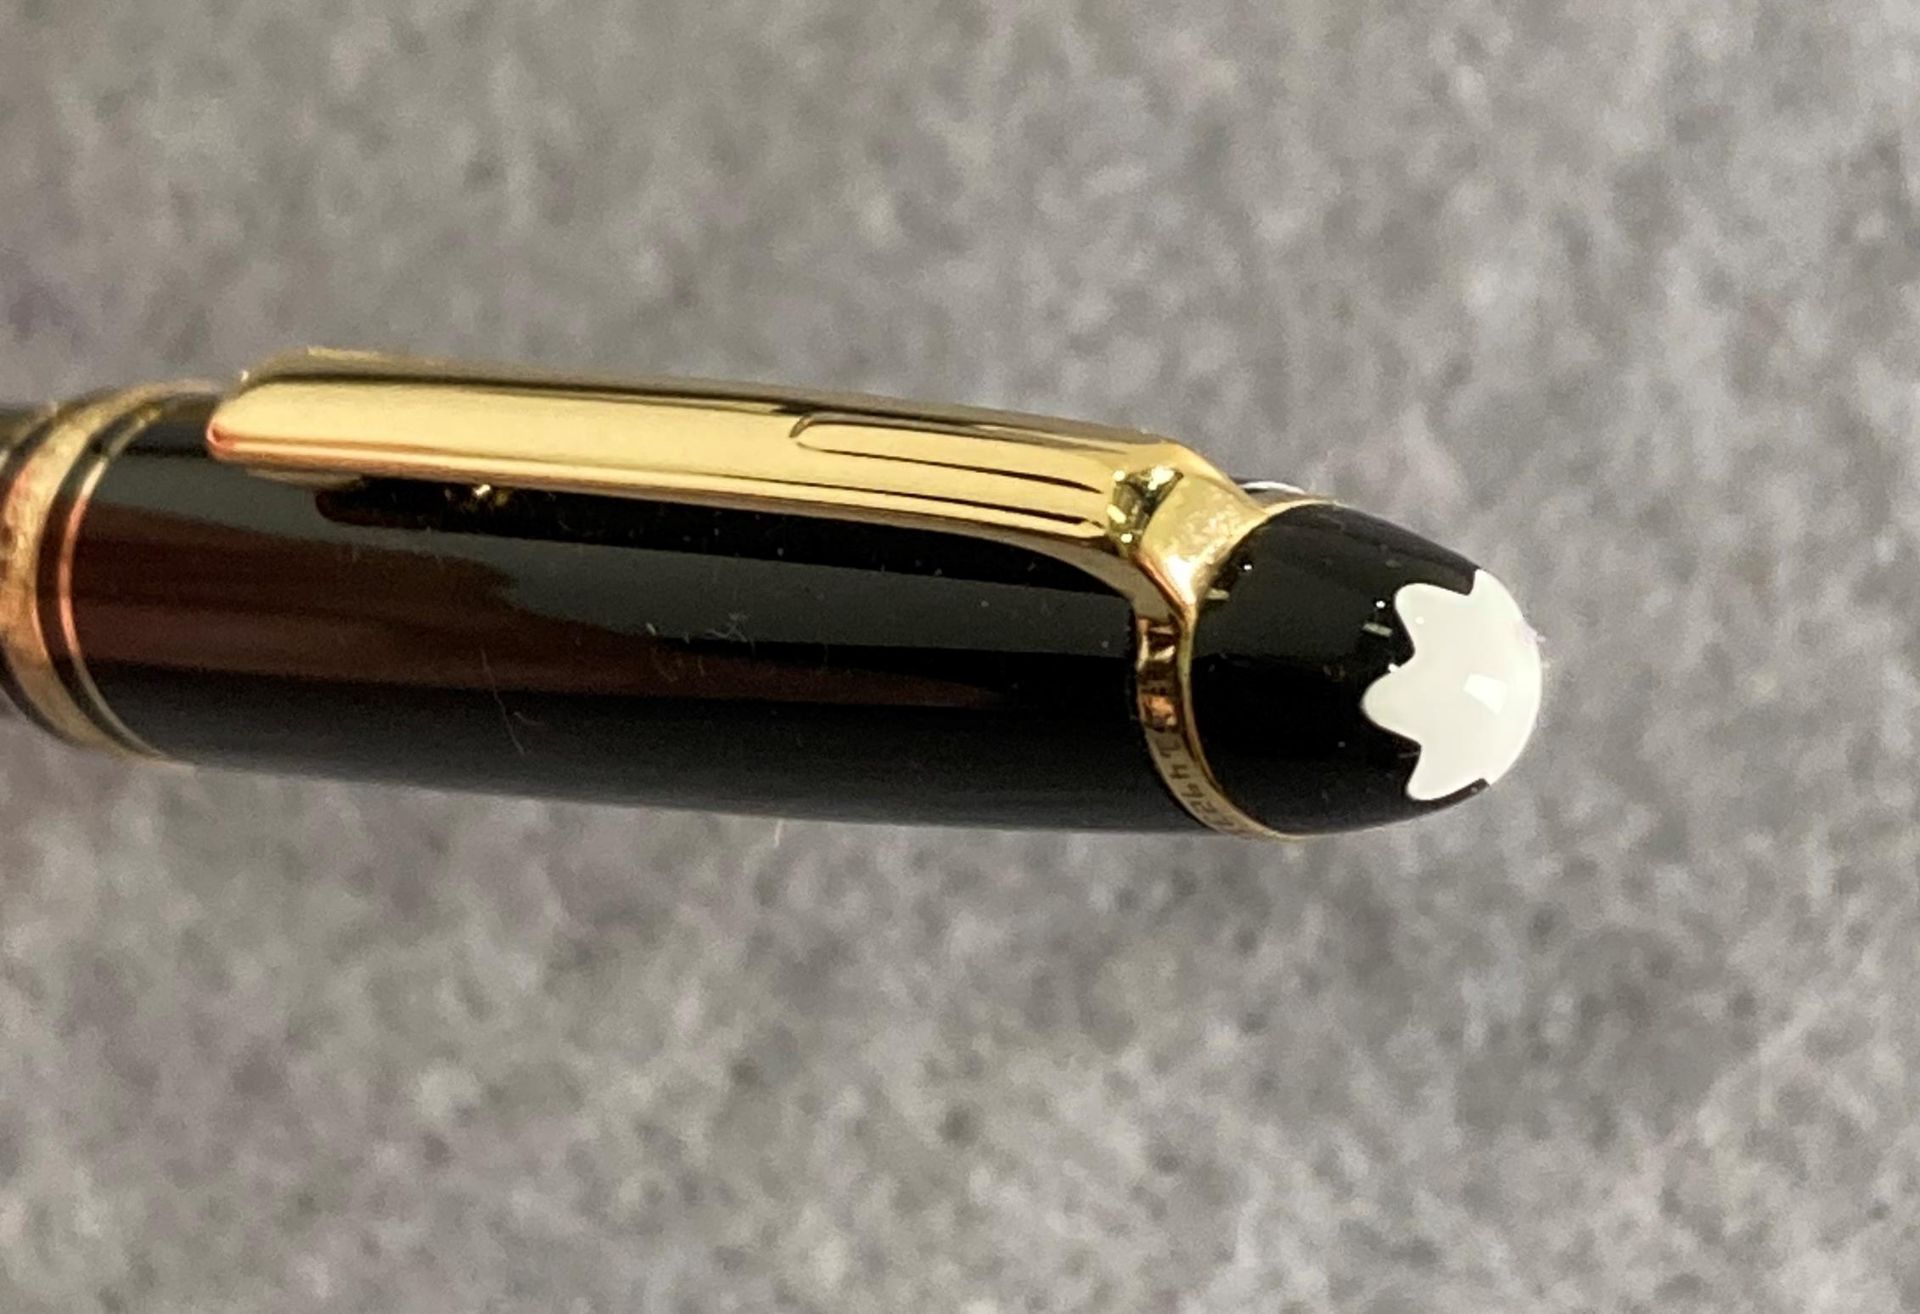 Montblanc-Meisterstuck gold-coated Classique Mechanical Pencil no: EY1492310 Germany, - Image 3 of 4